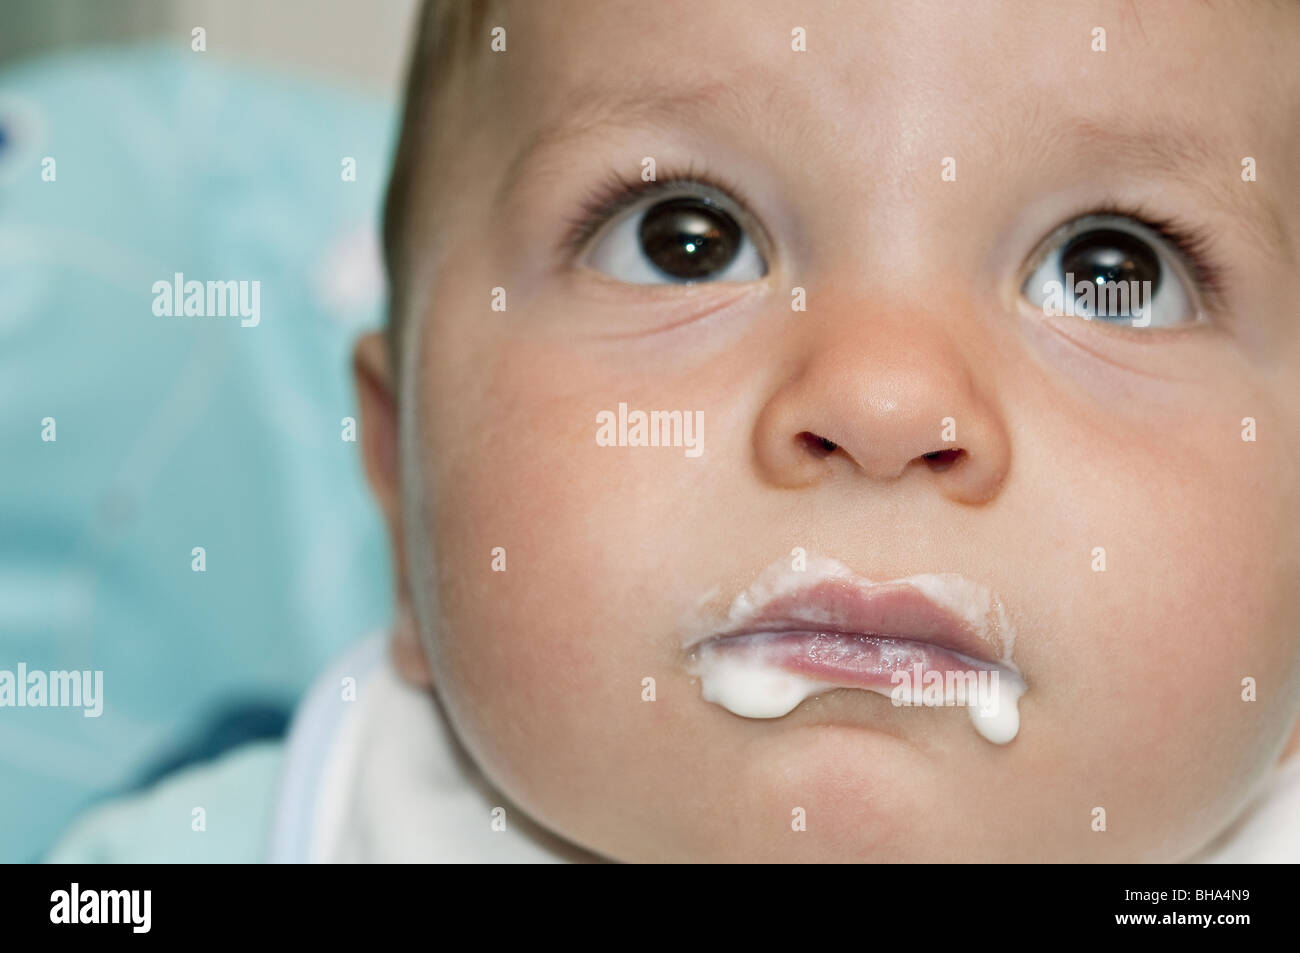 Closeup of baby boy's face with food around his mouth Stock Photo